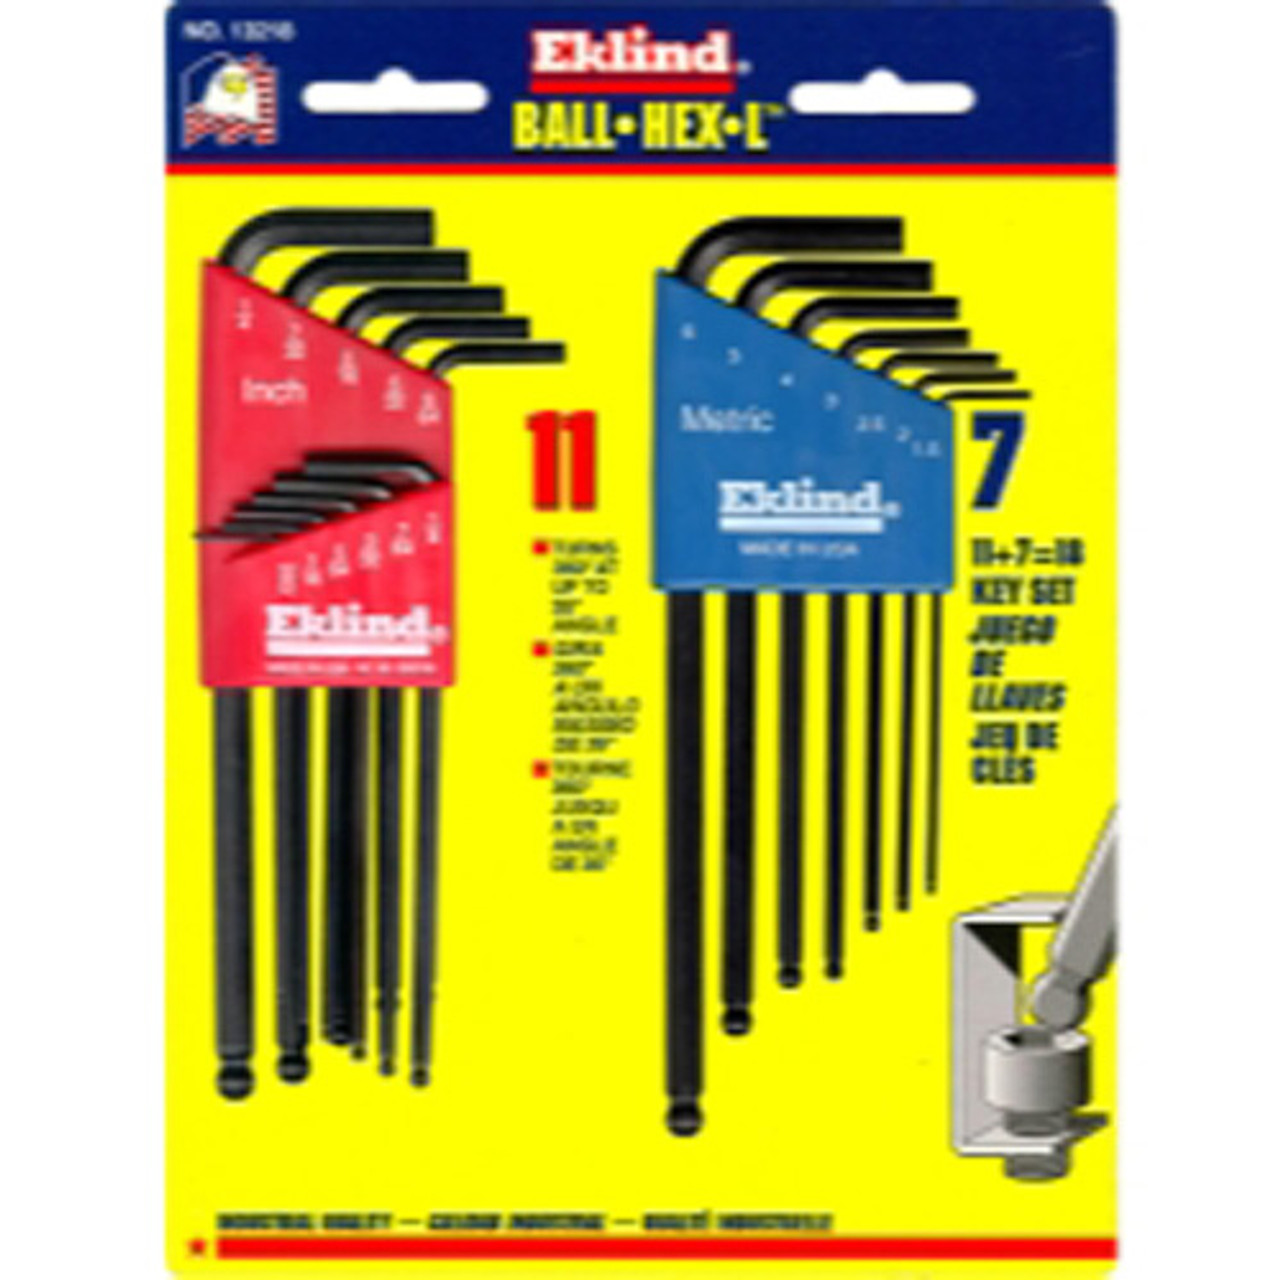 Eklind® SAE/Metric L-Wrench Combination Hex Key Set - 22 Piece at